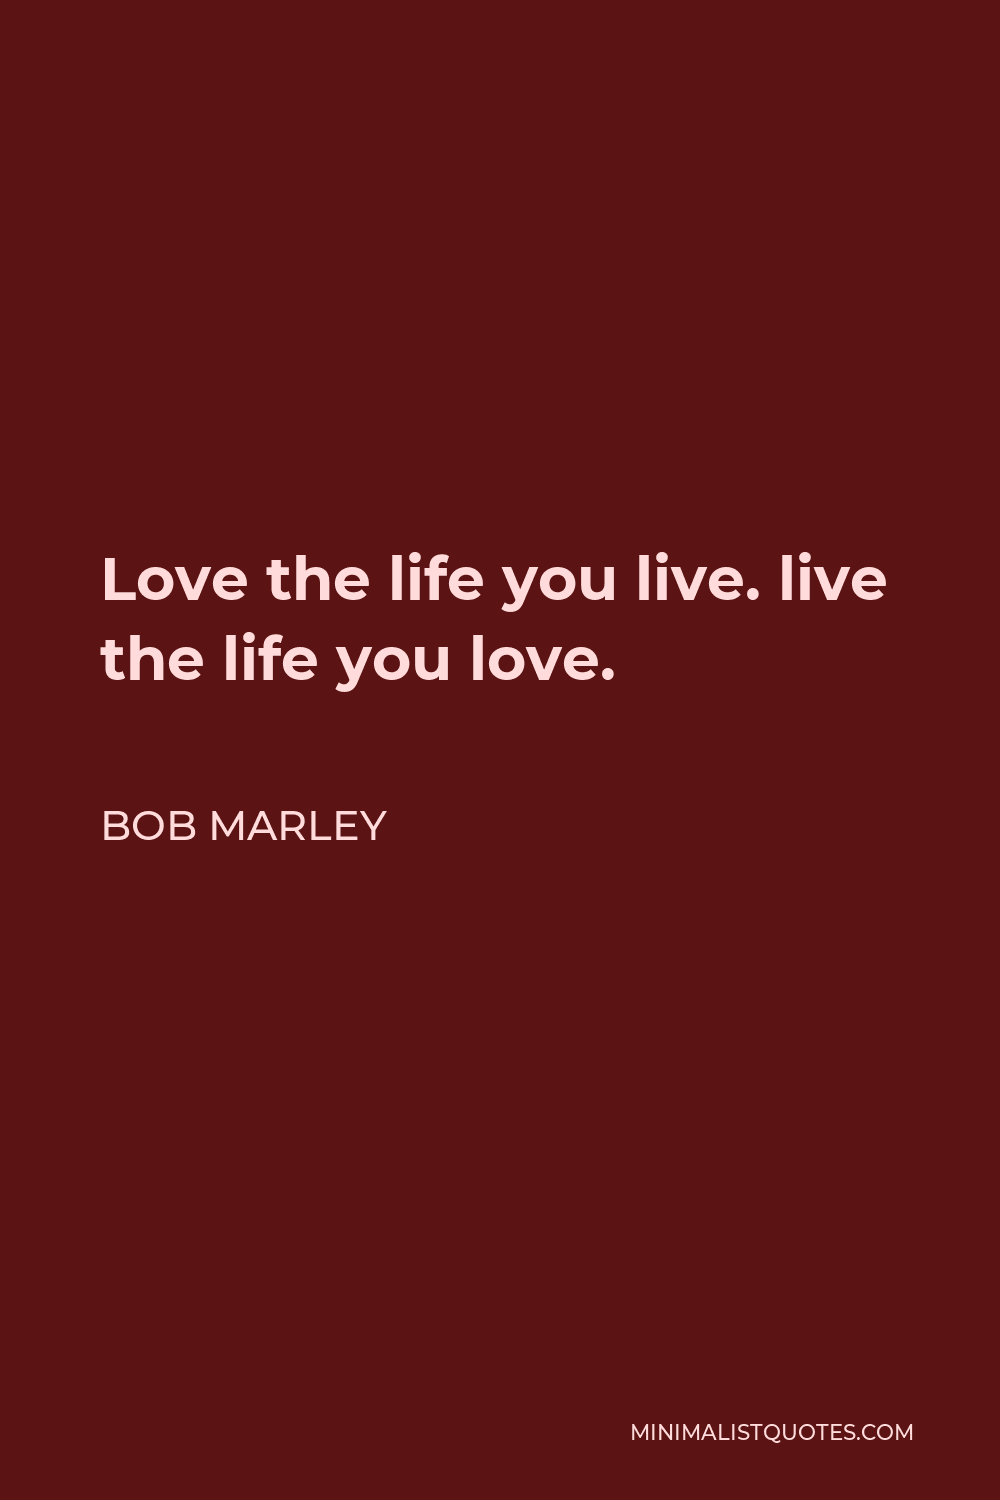 Bob Marley Quote - Love the life you live. live the life you love.